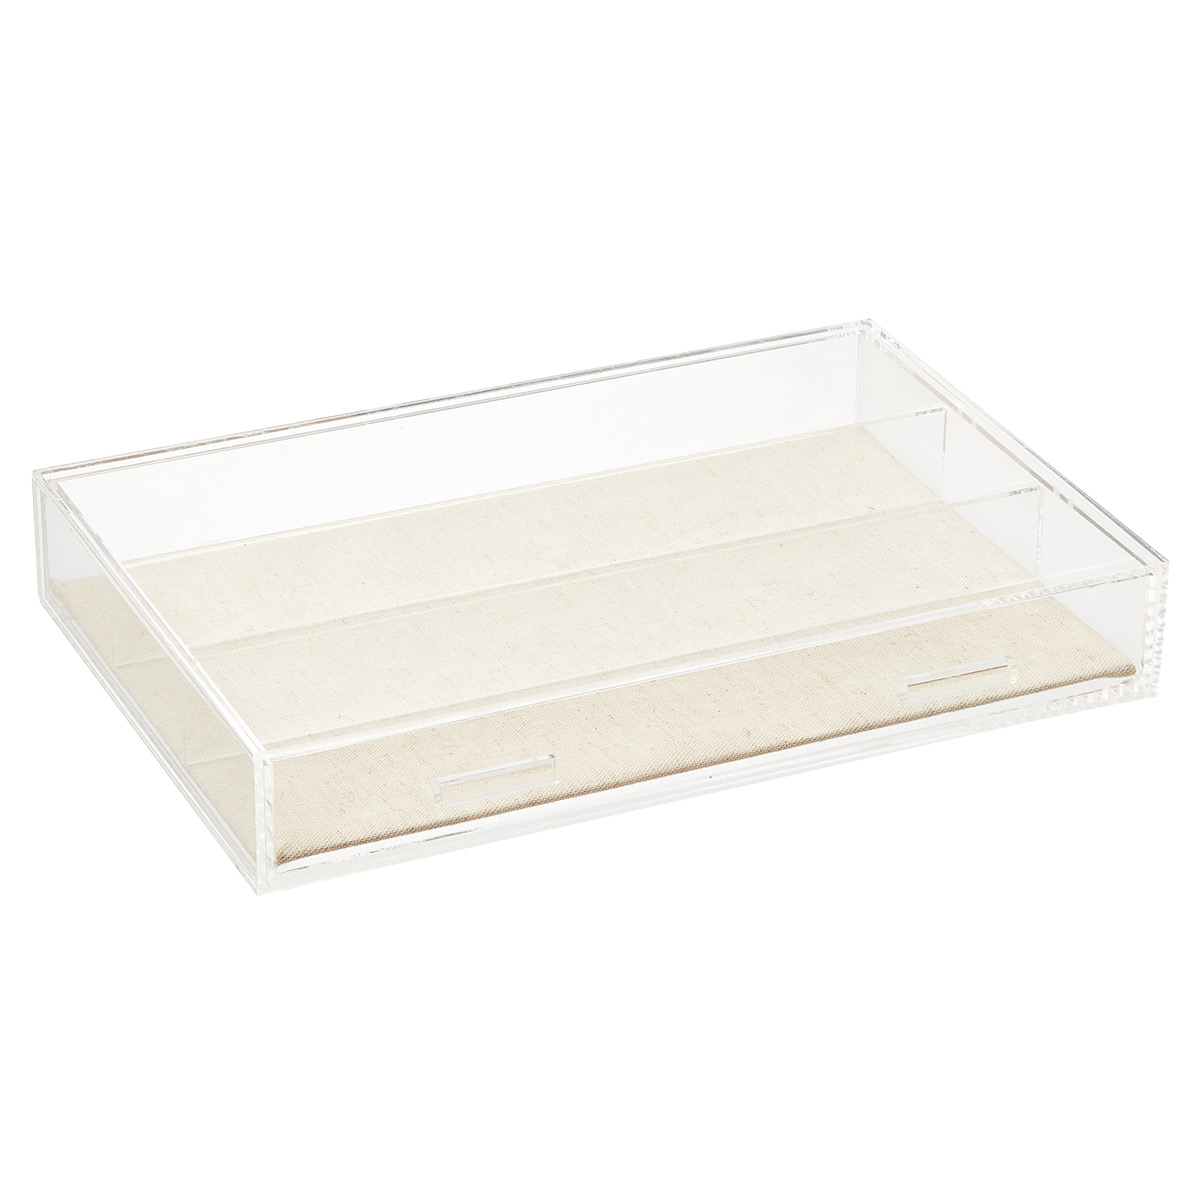 The Container Store 3-Compartment Wide Luxe Acrylic Jewelry Drawer Clear/Linen